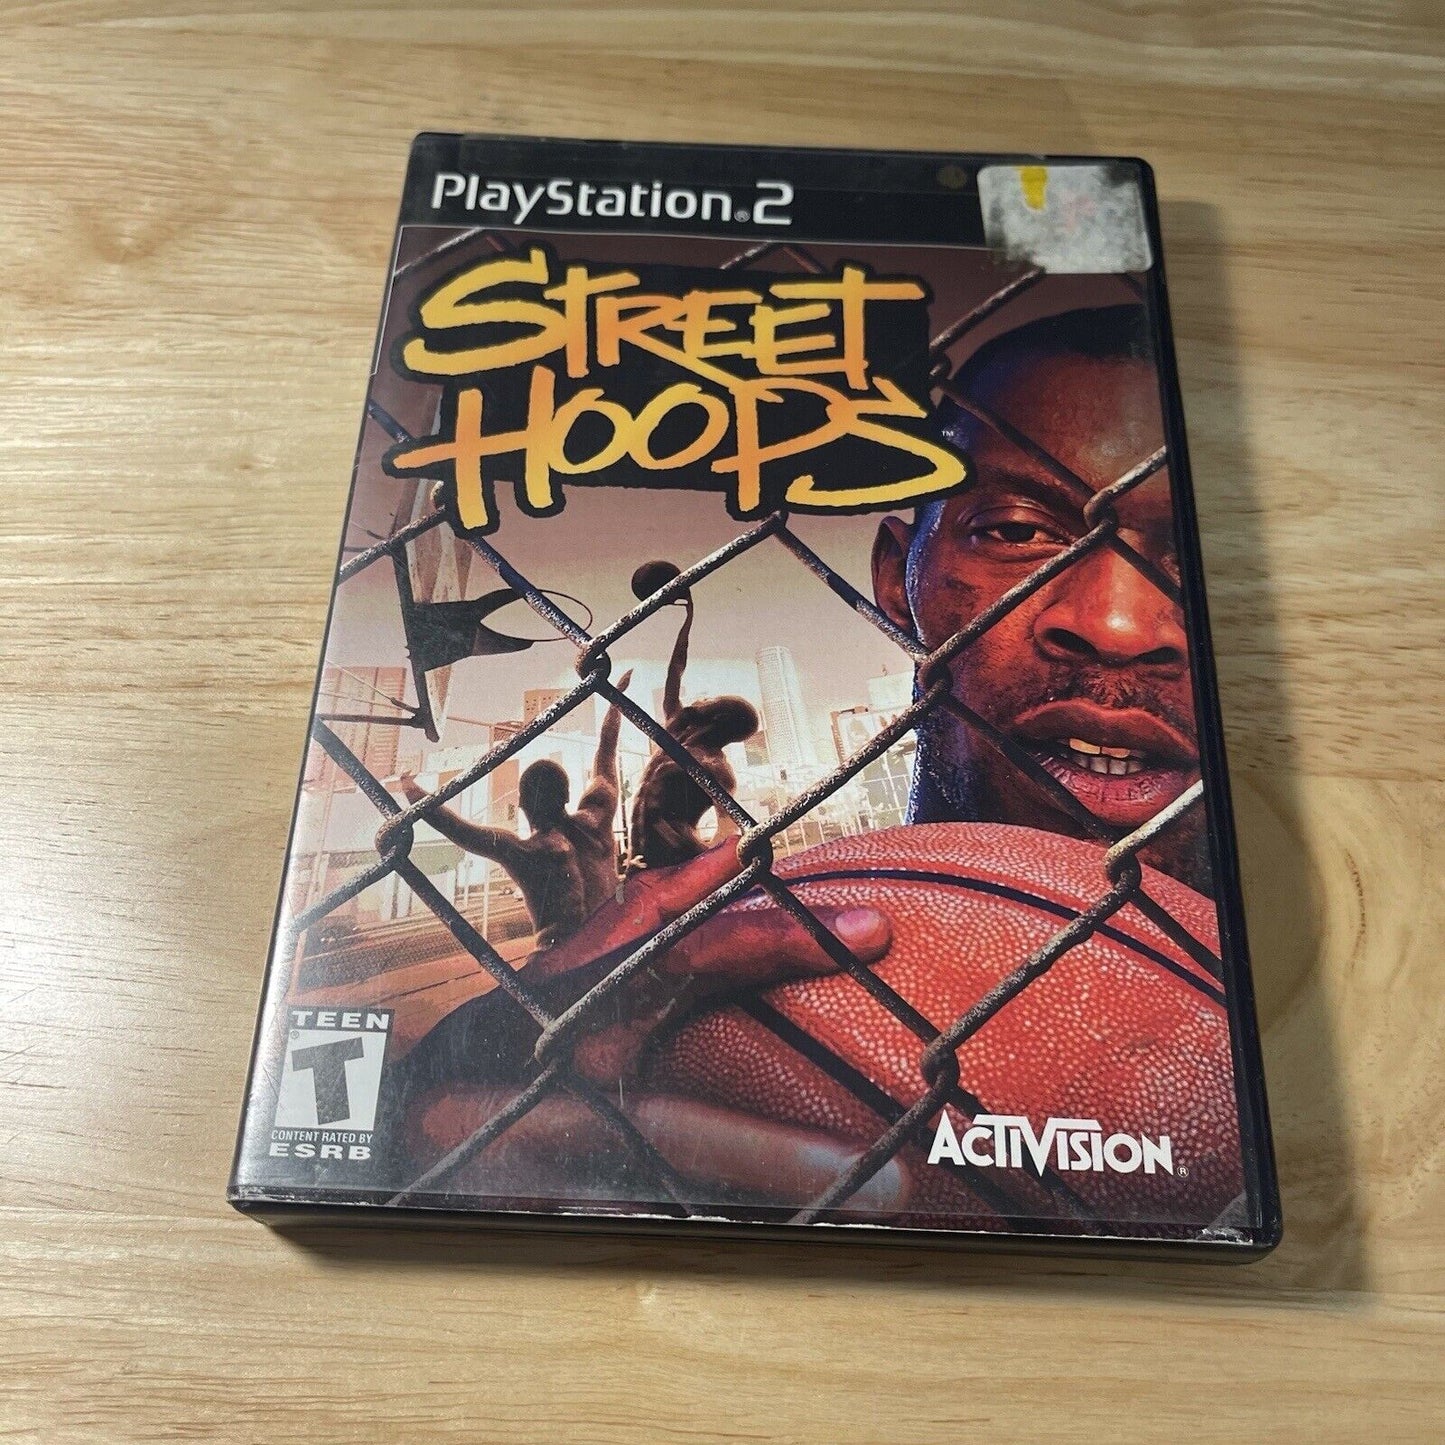 Street Hoops Greatest Hits  (Sony PlayStation 2, 2002) PS2 Video Game(No Manual)